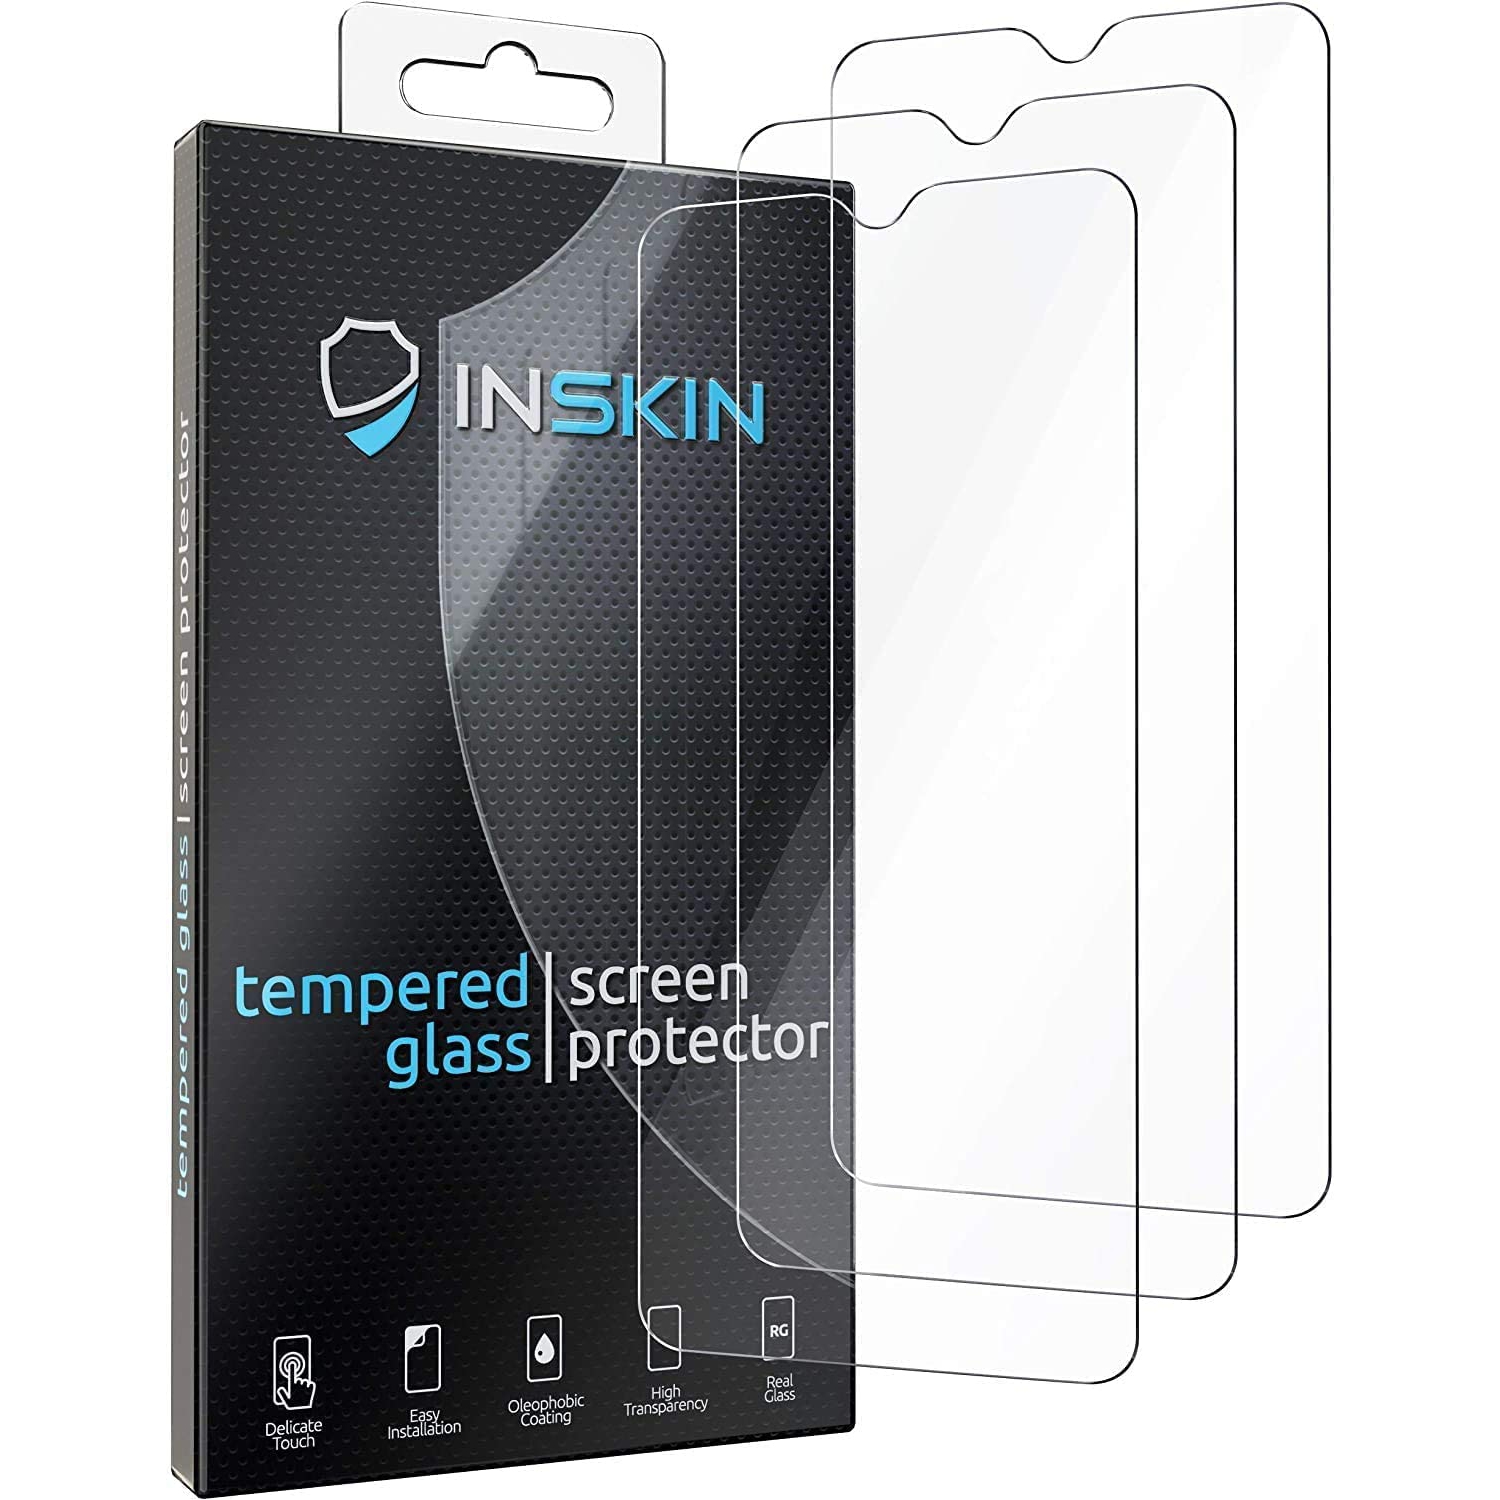 Inskin Tempered Glass Screen Protector for TCL 30 XE 5G 2022 6.52 inch - 3-Pack, HD Clear, Case-Friendly, 9H Hardness